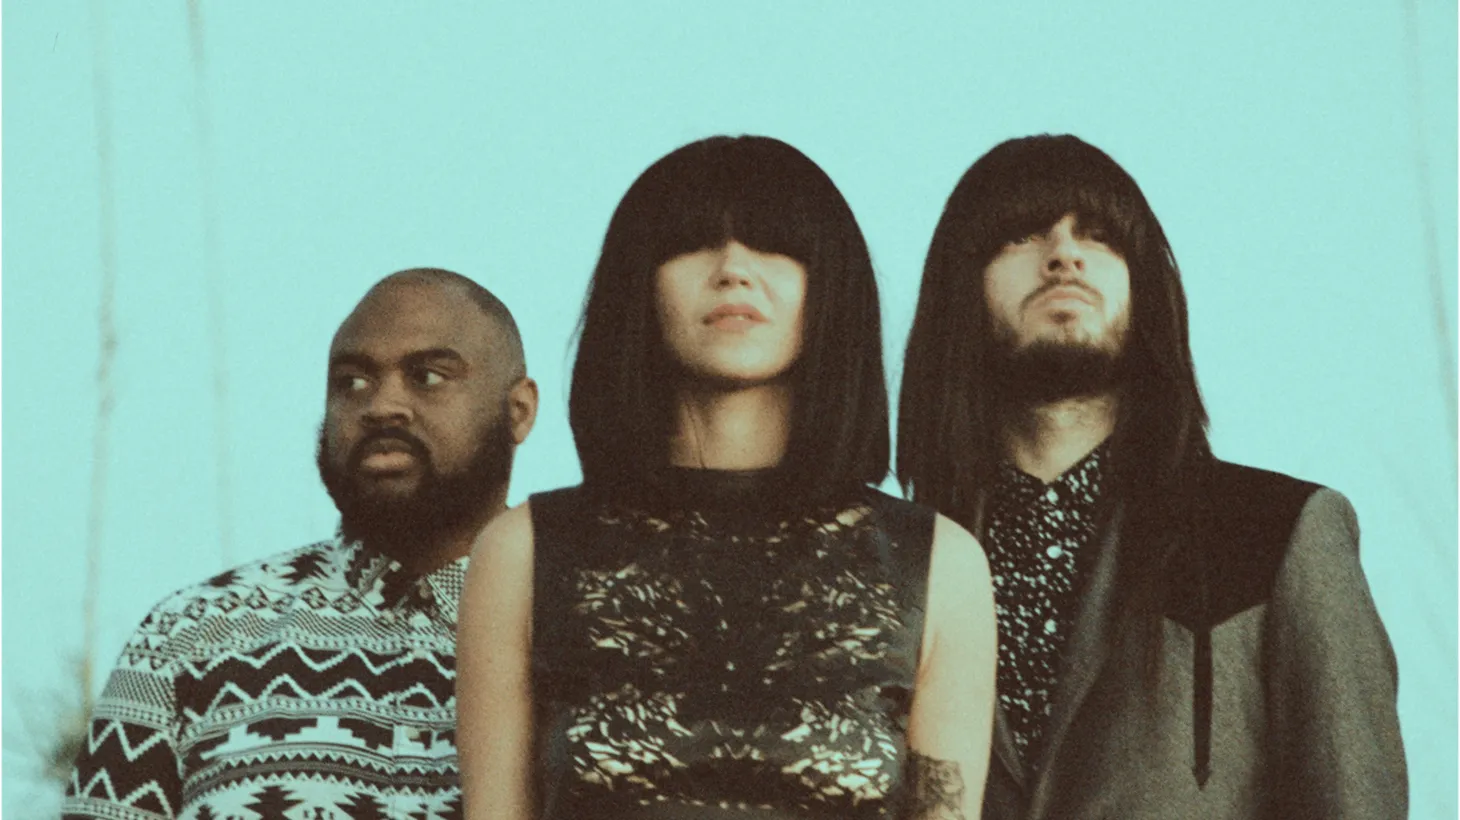 Khruangbin are a captivating trio who expands their Thai funk sound to include hints of the Middle East on their album Con Todo El Mundo.